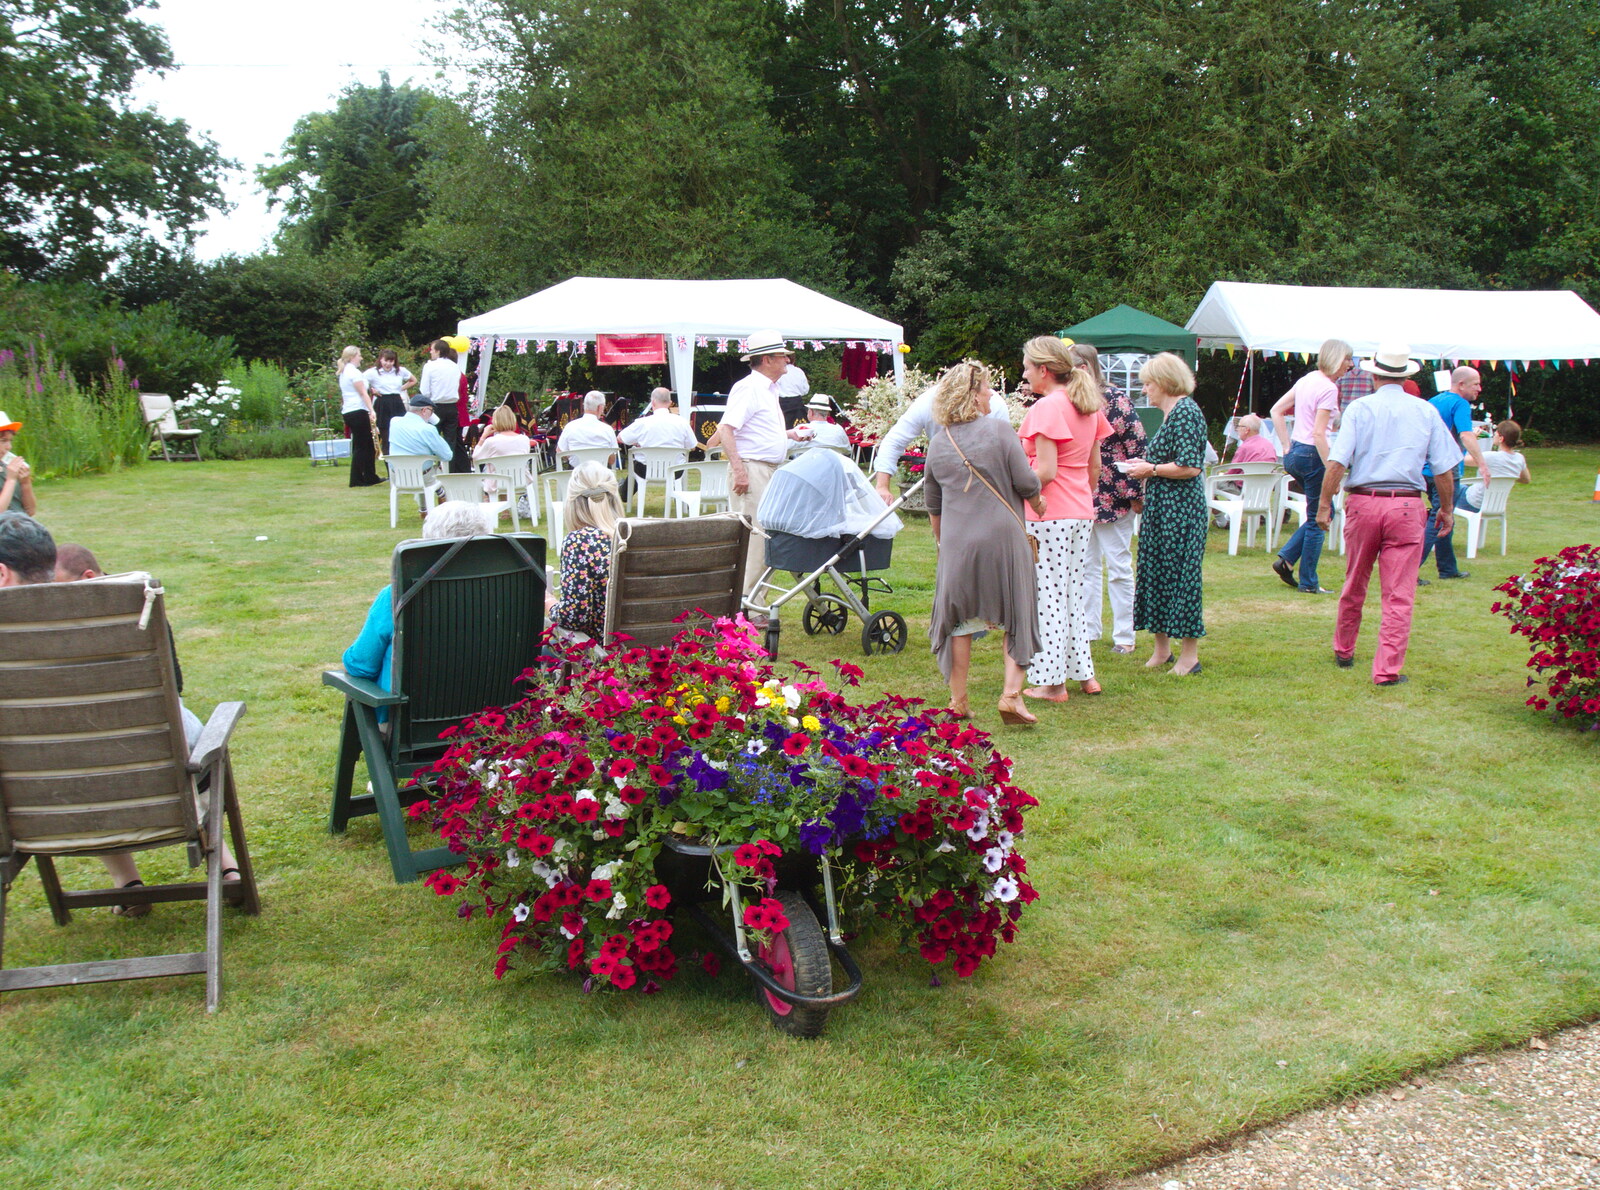 There's a wheel-barrow full of flowers from GSB at the Summer Fete, Market Weston, Suffolk - 20th July 2019